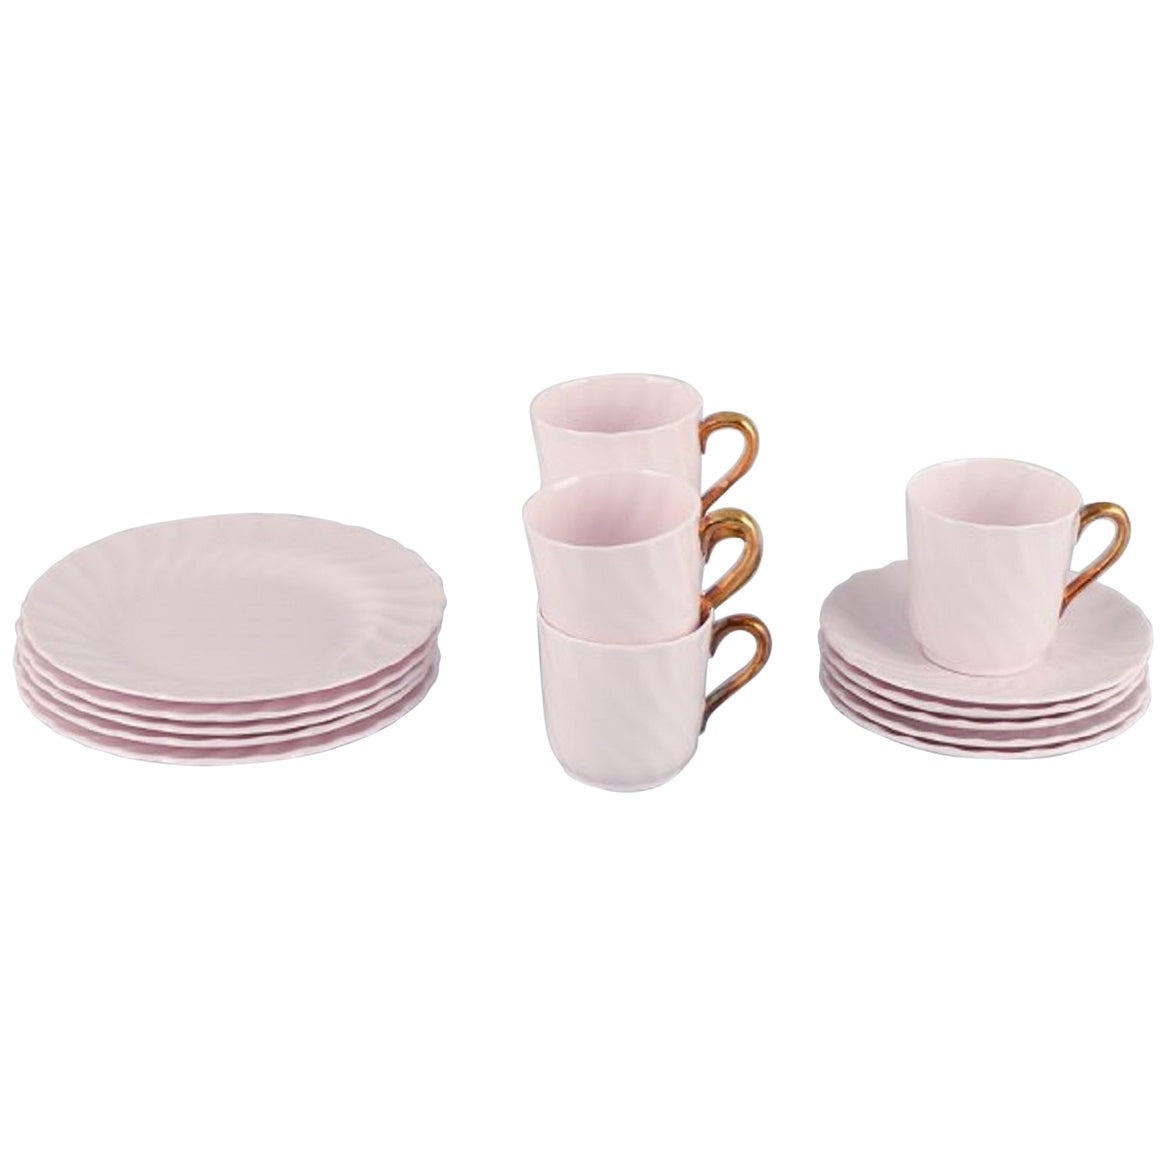 Tuscan, England, Five-Person Coffee Service in Pink Porcelain